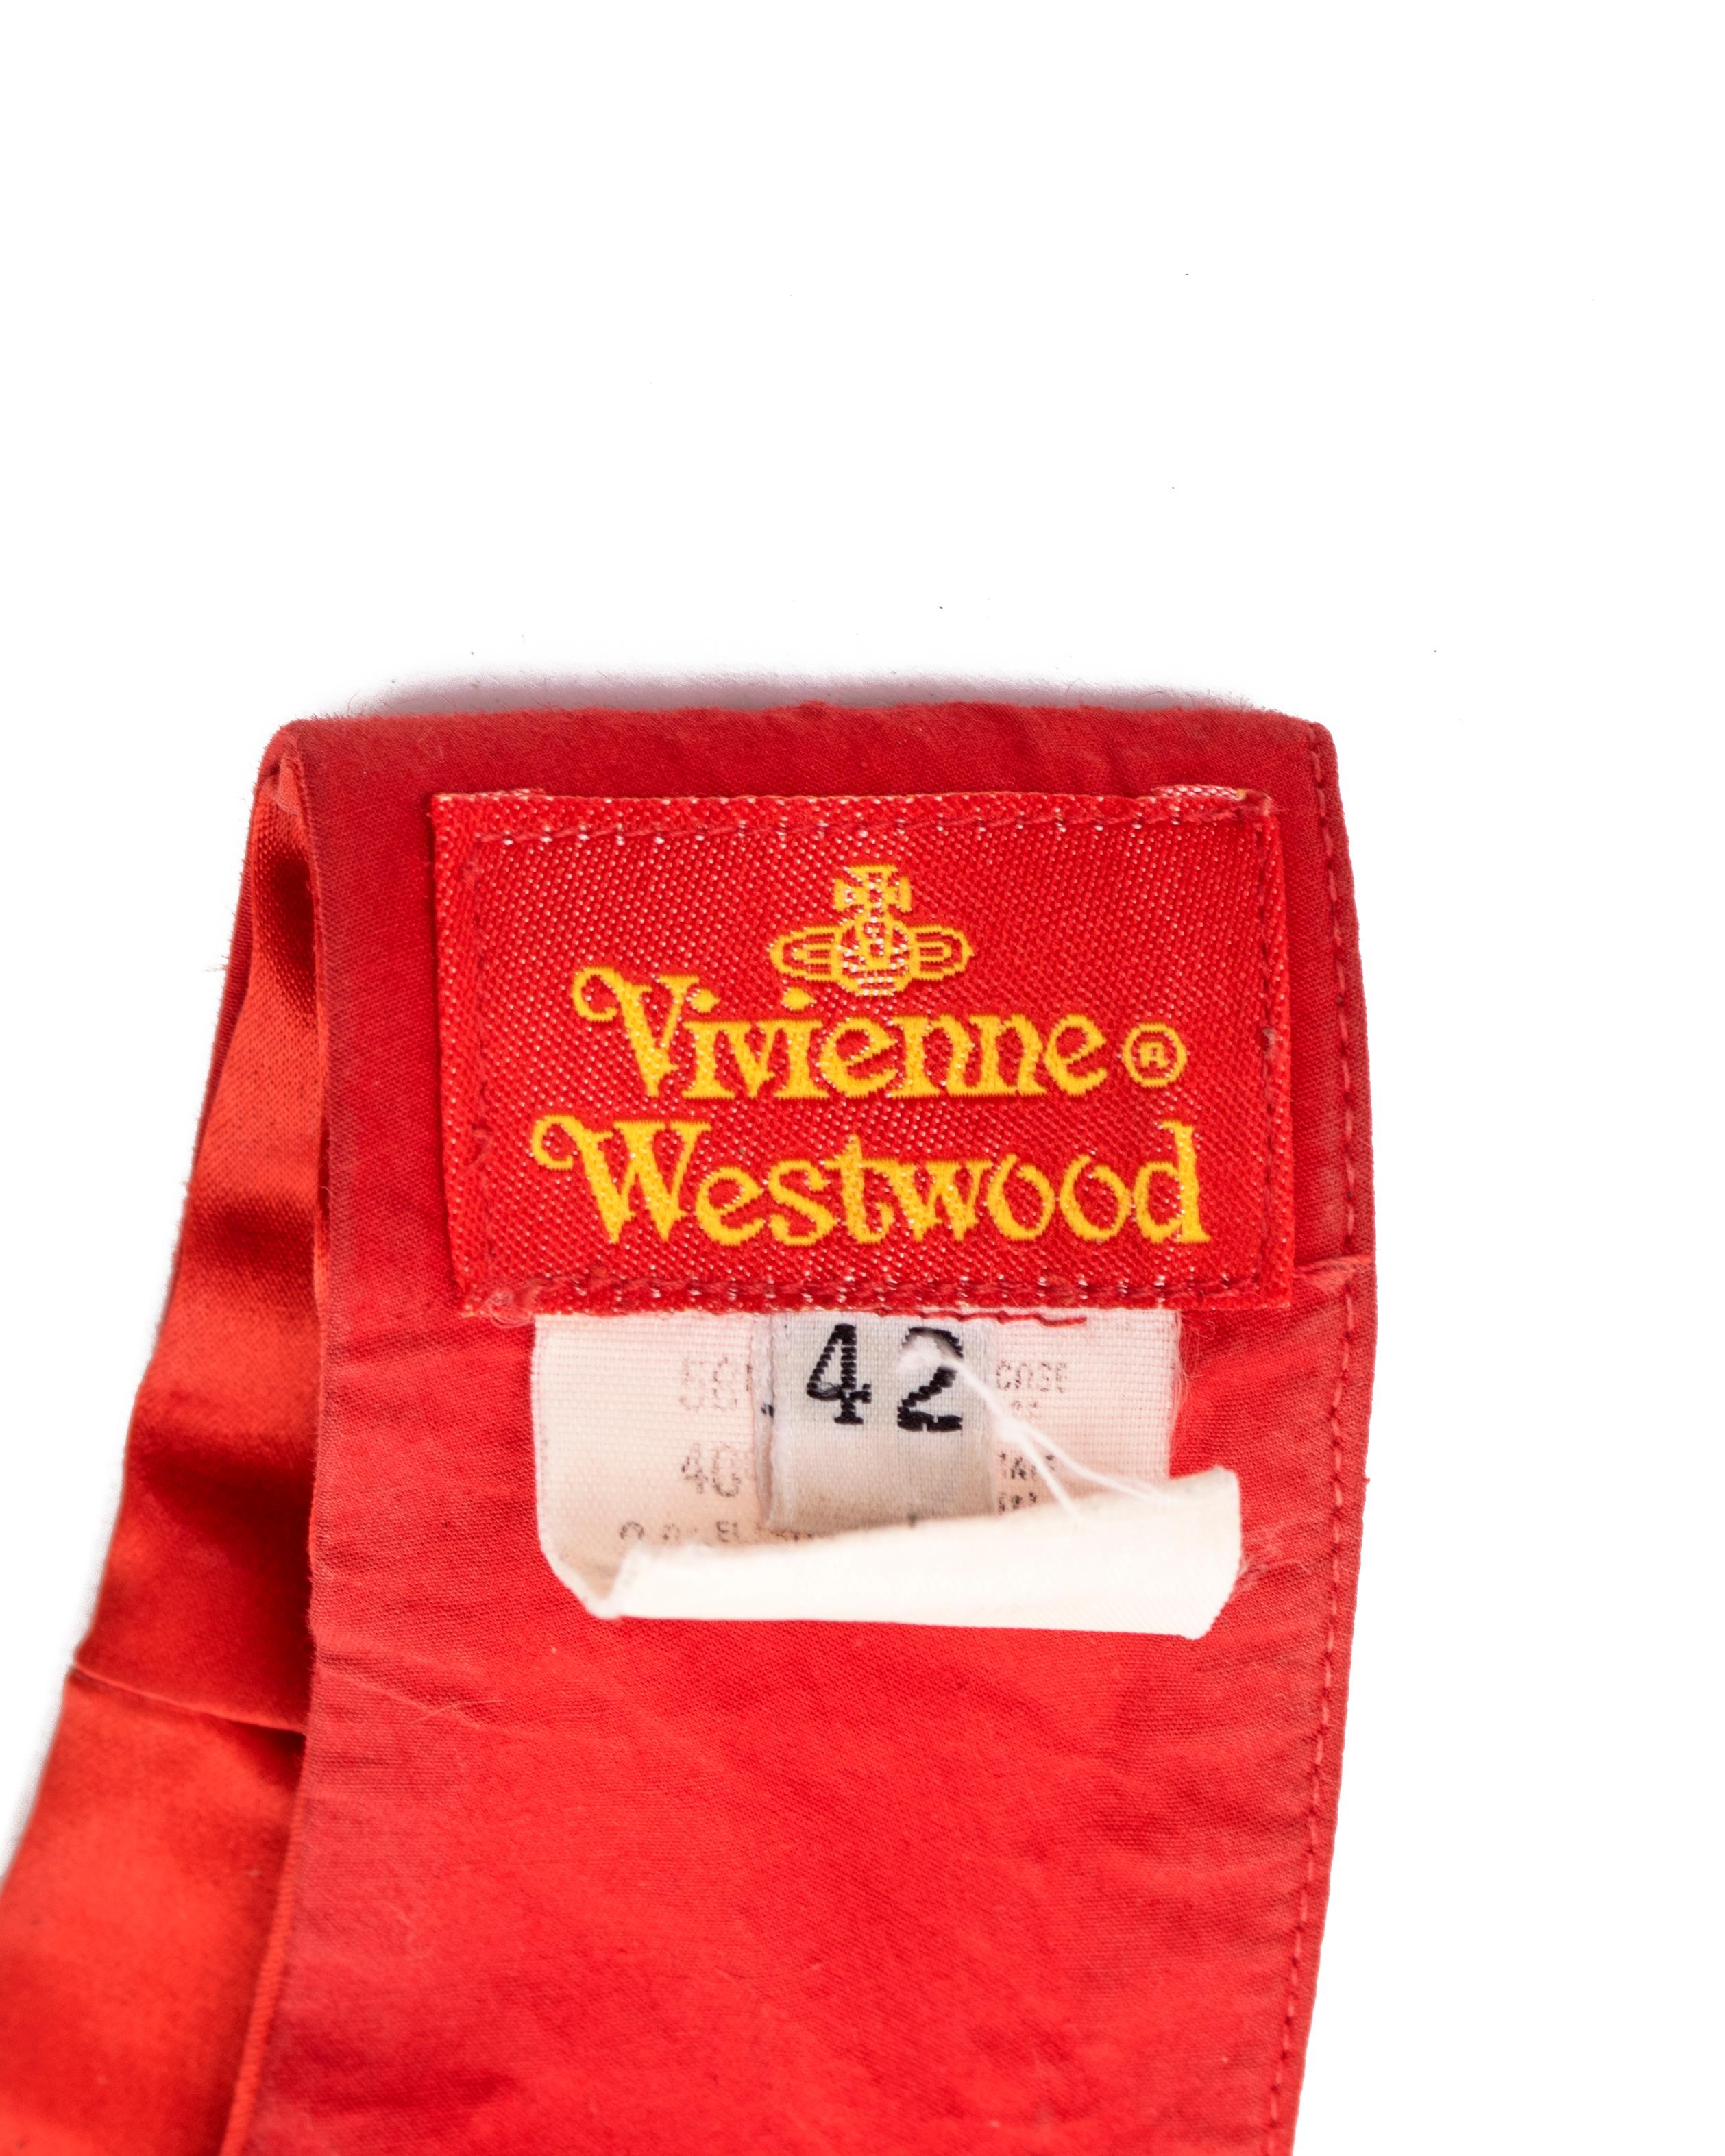 Vivienne Westwood red satin corset with embroidered orb,  c. 1990s For Sale 3